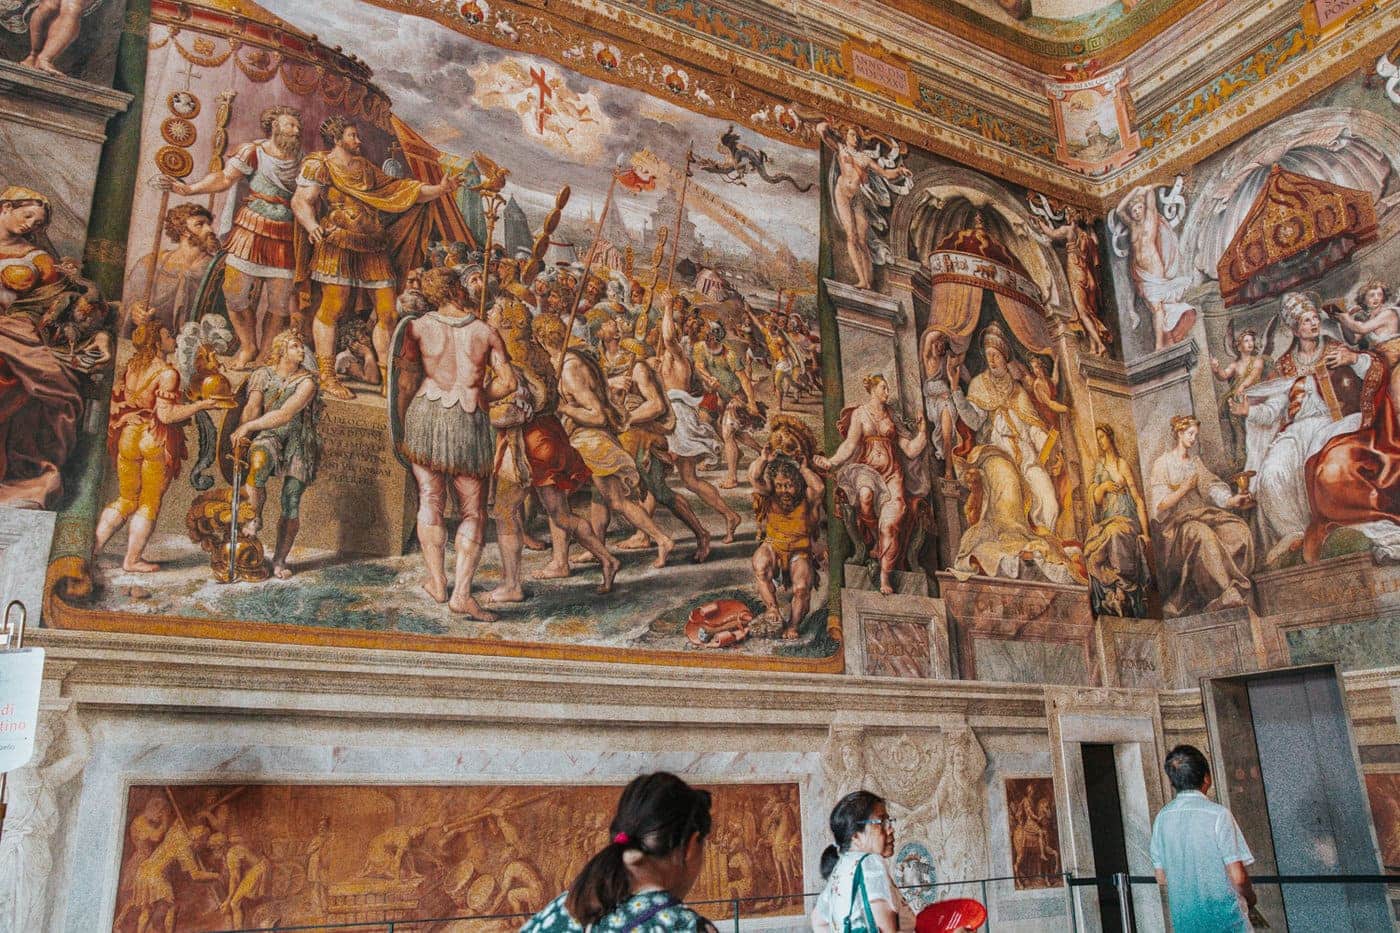 Paintings in one of the Vatican museums